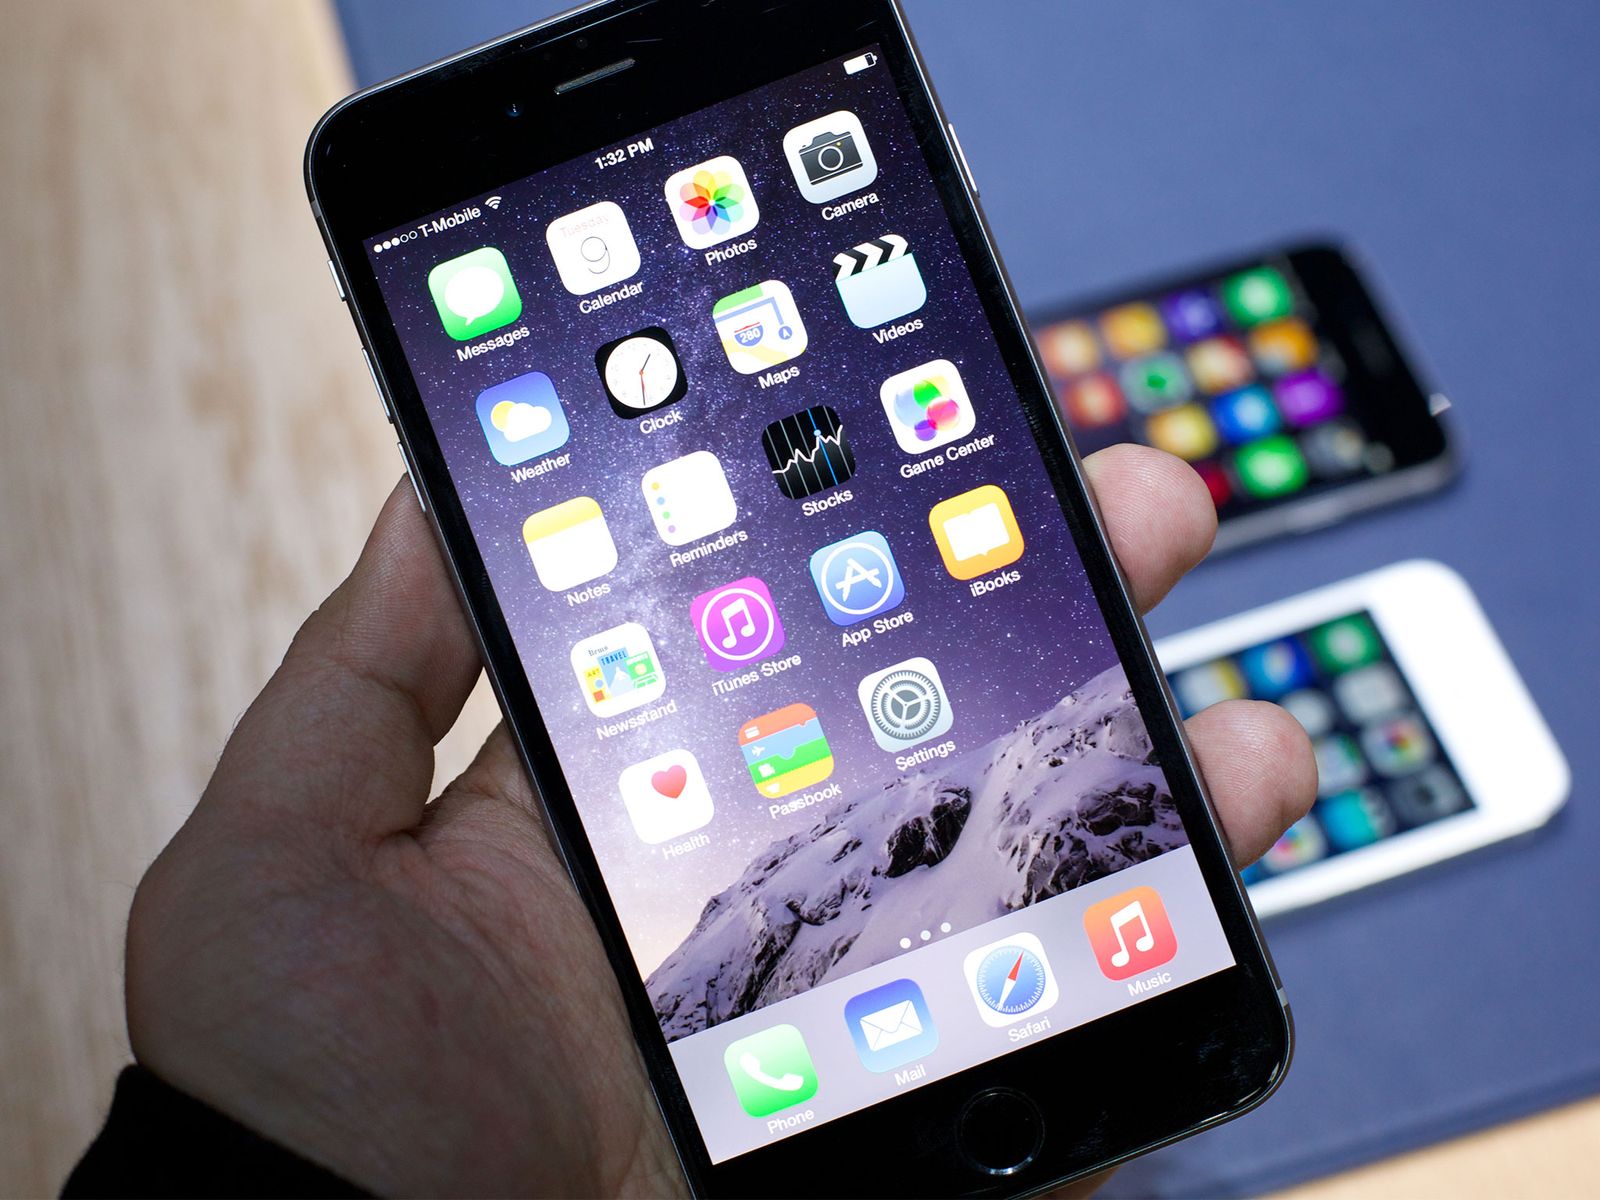 iOS 8 review